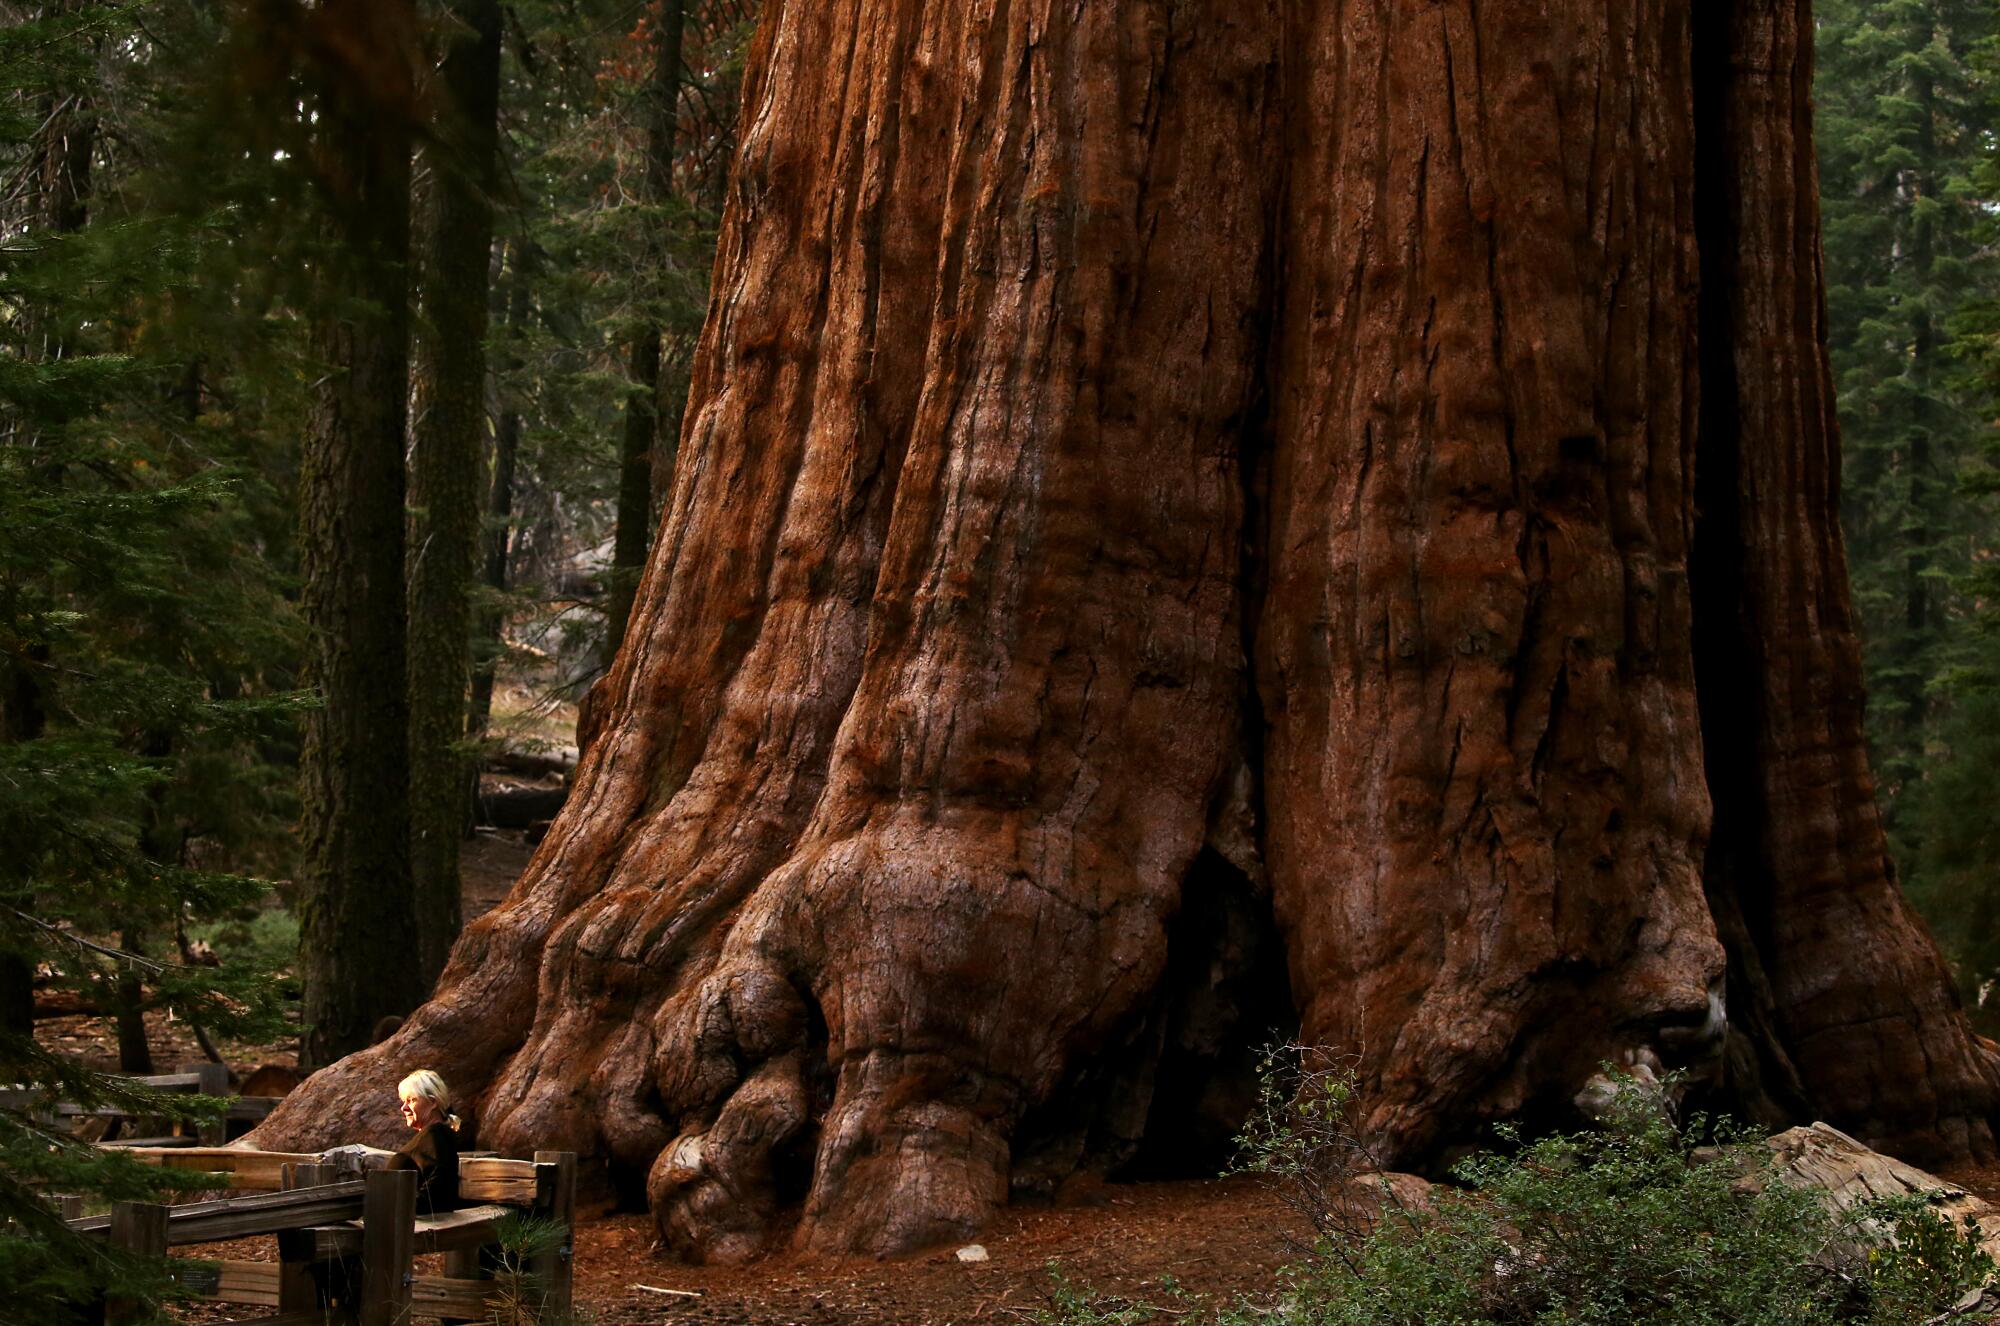 A visitor sitting on a bench in a forest, dwarfed by the massive trunk of a giant sequoia tree